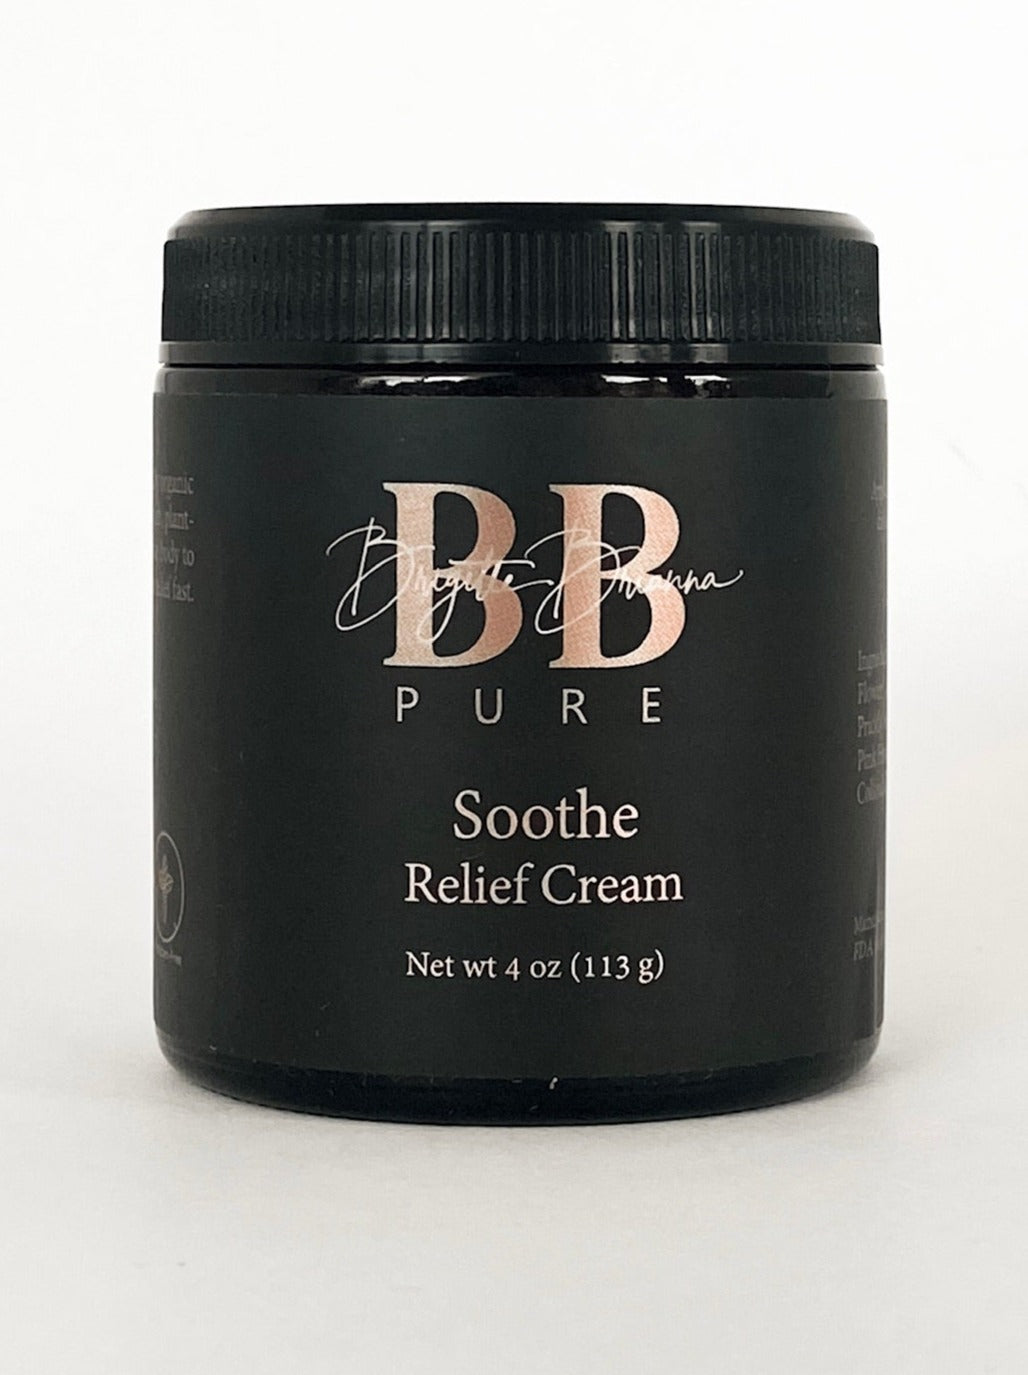 BB Pure Soothe Relief Cream